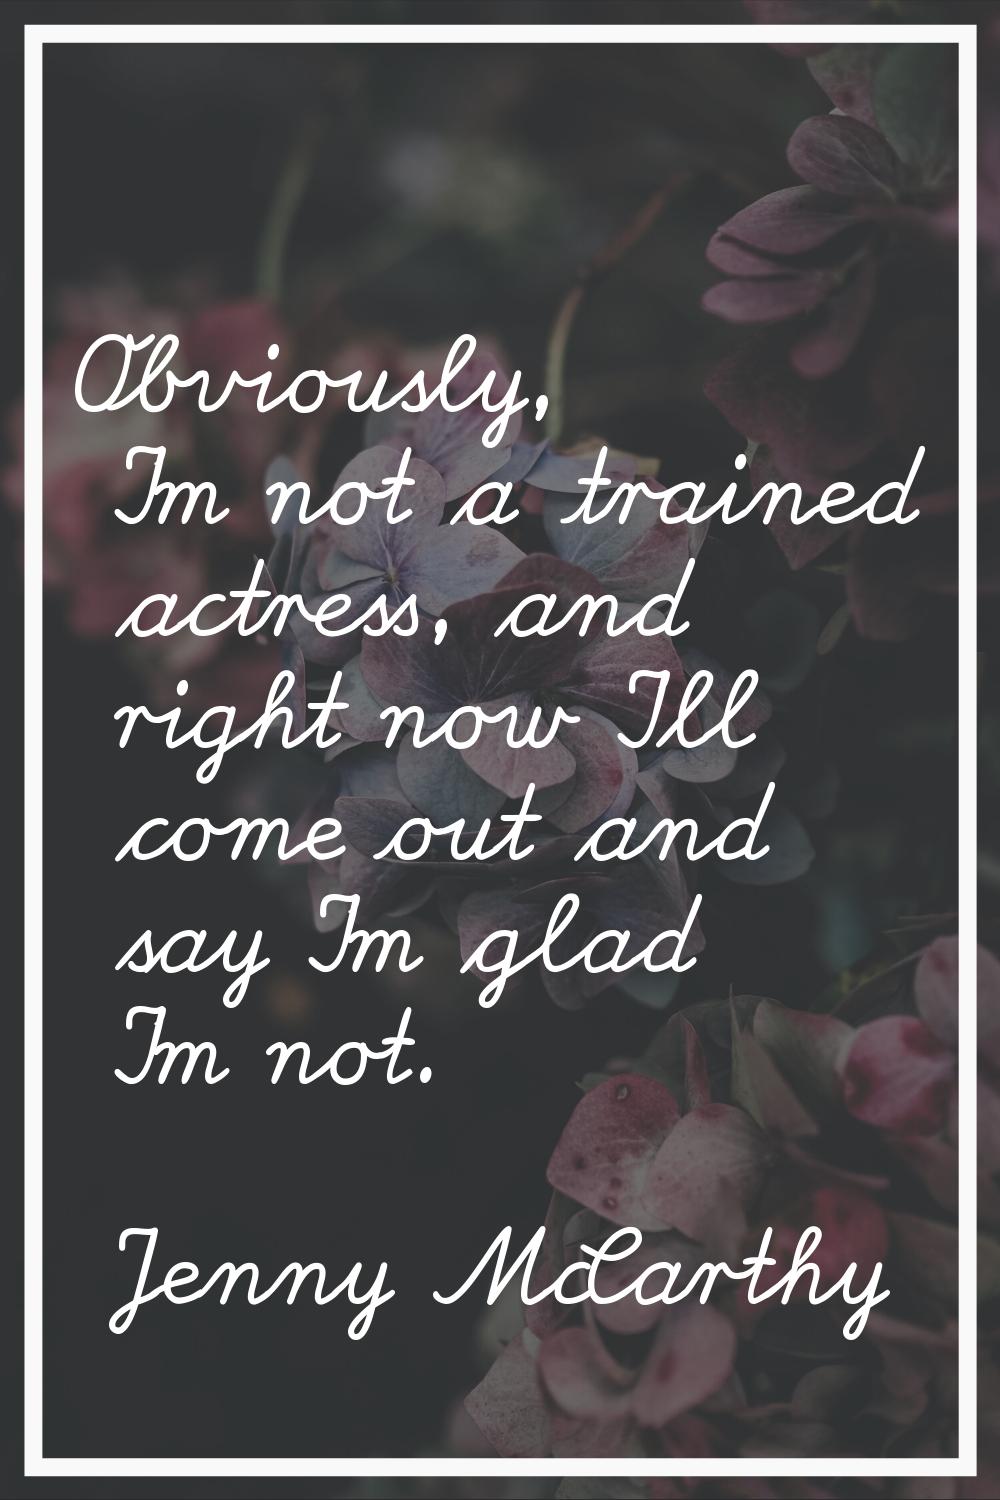 Obviously, I'm not a trained actress, and right now I'll come out and say I'm glad I'm not.